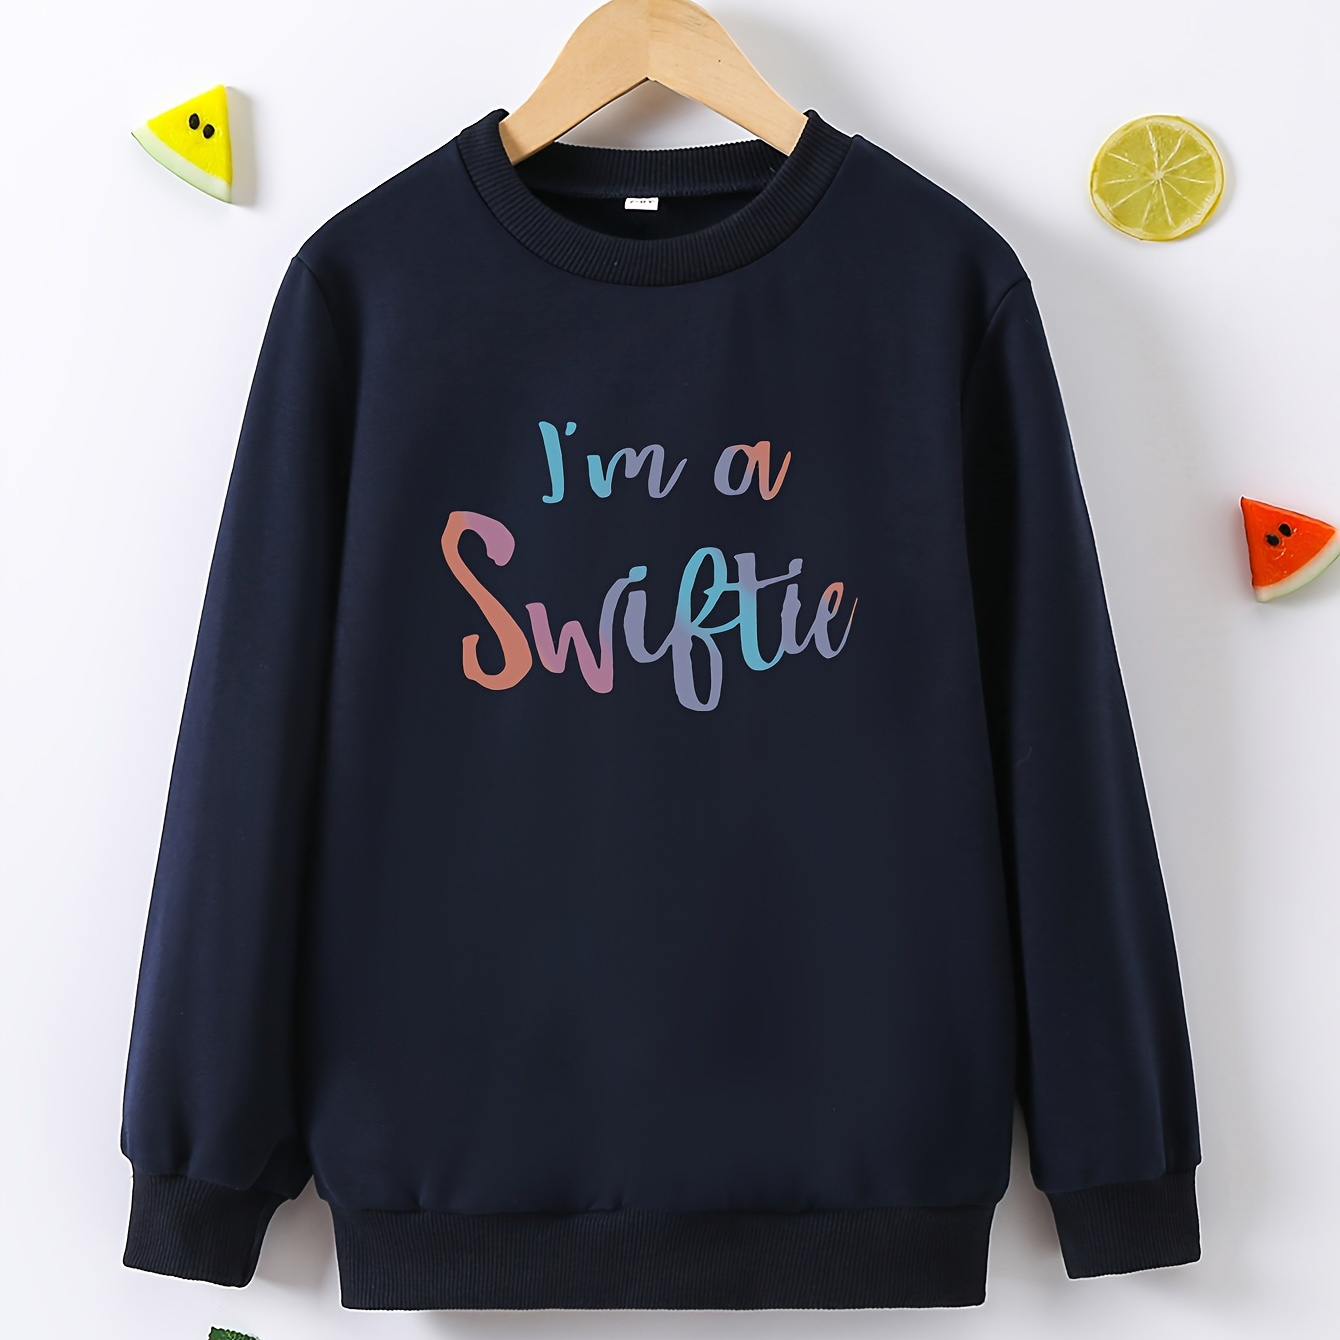 

Music Fan Print Girls Everyday Tops, Long Sleeve Active Sweatshirts For Fashion Look, Kids Clothing Gift